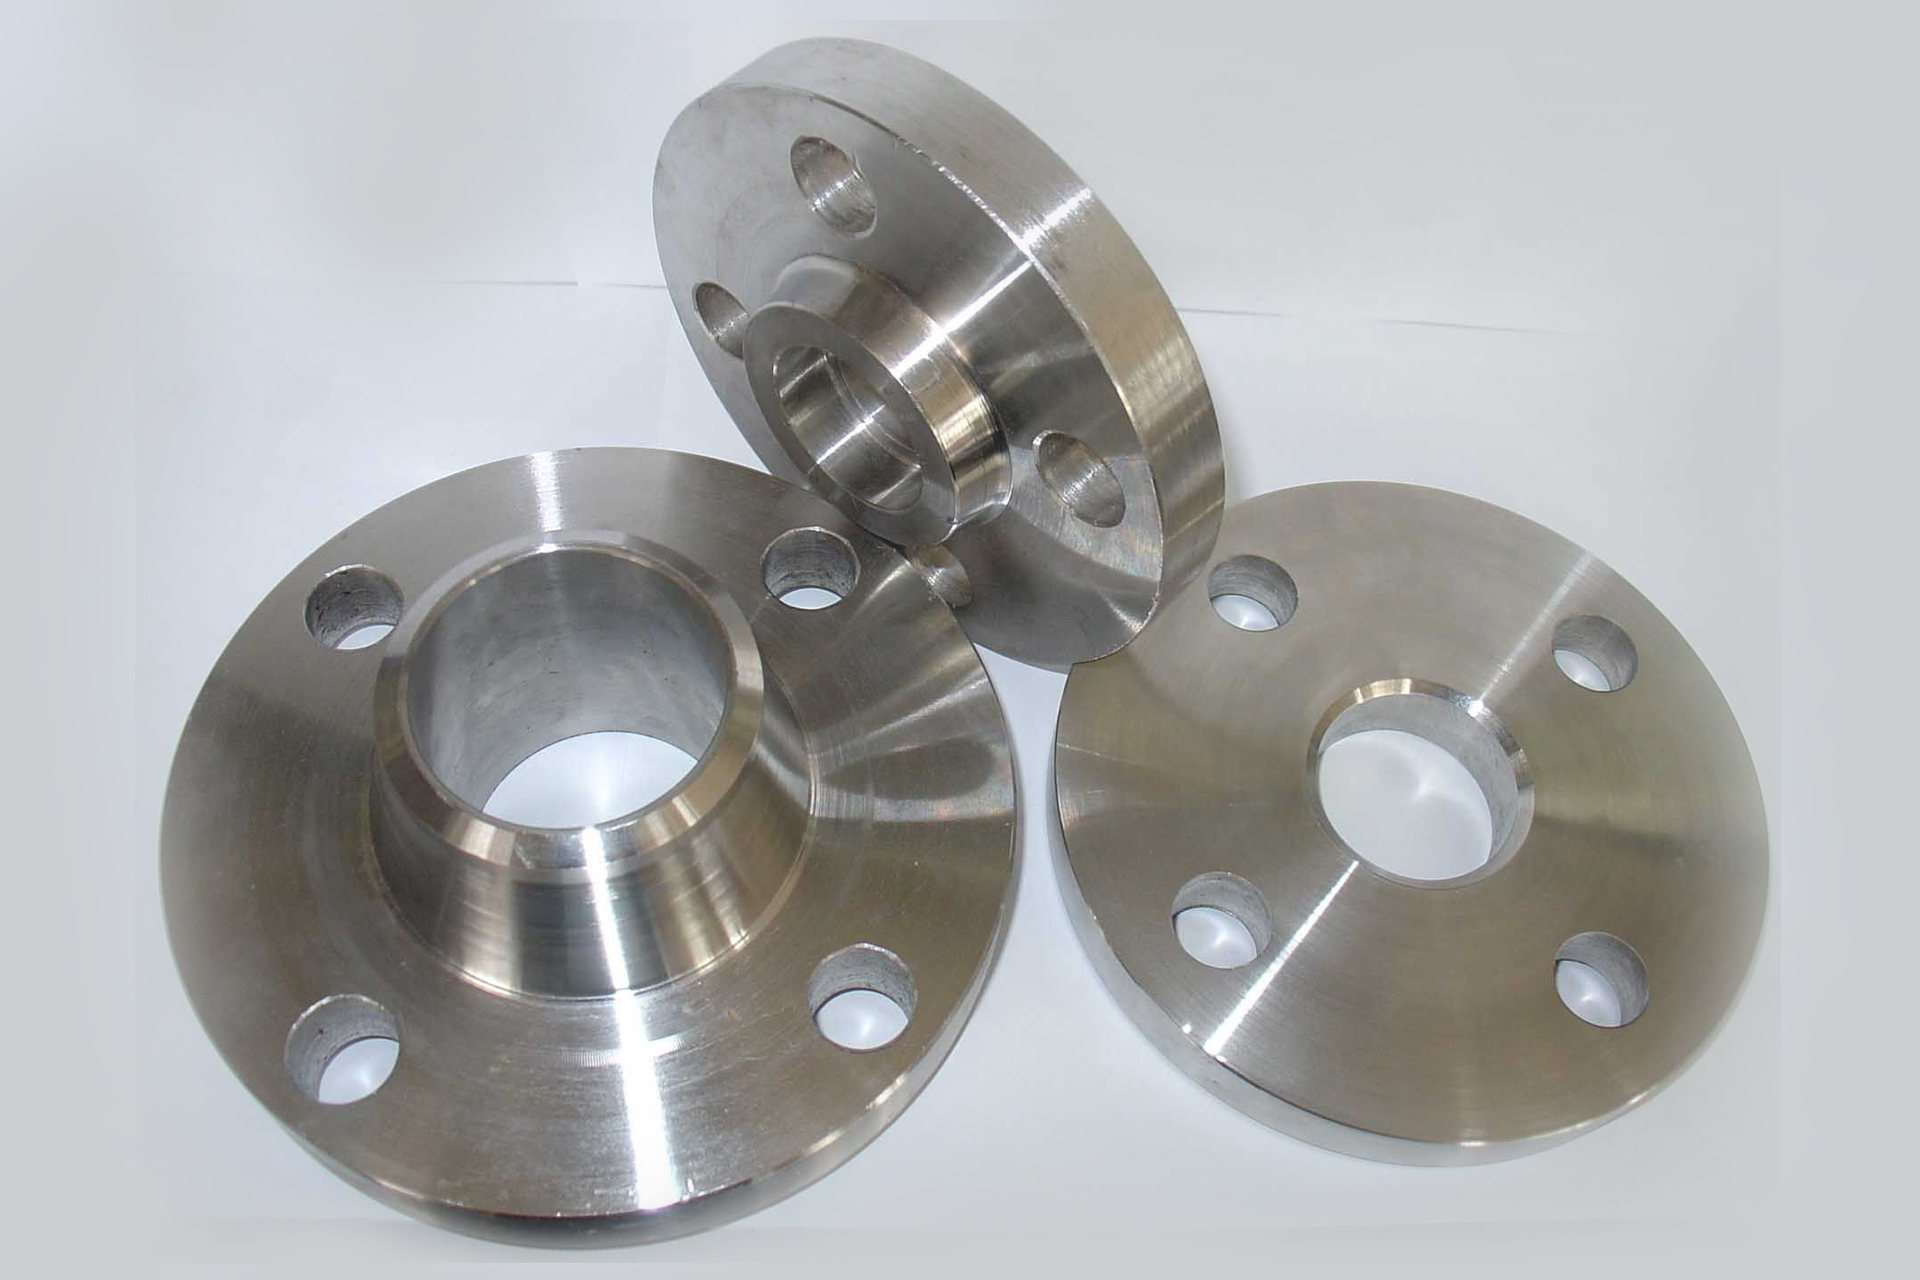 long-welding-necks-class300-forged-seamless-manufacturers-exporters-suppliers-importers.jpg